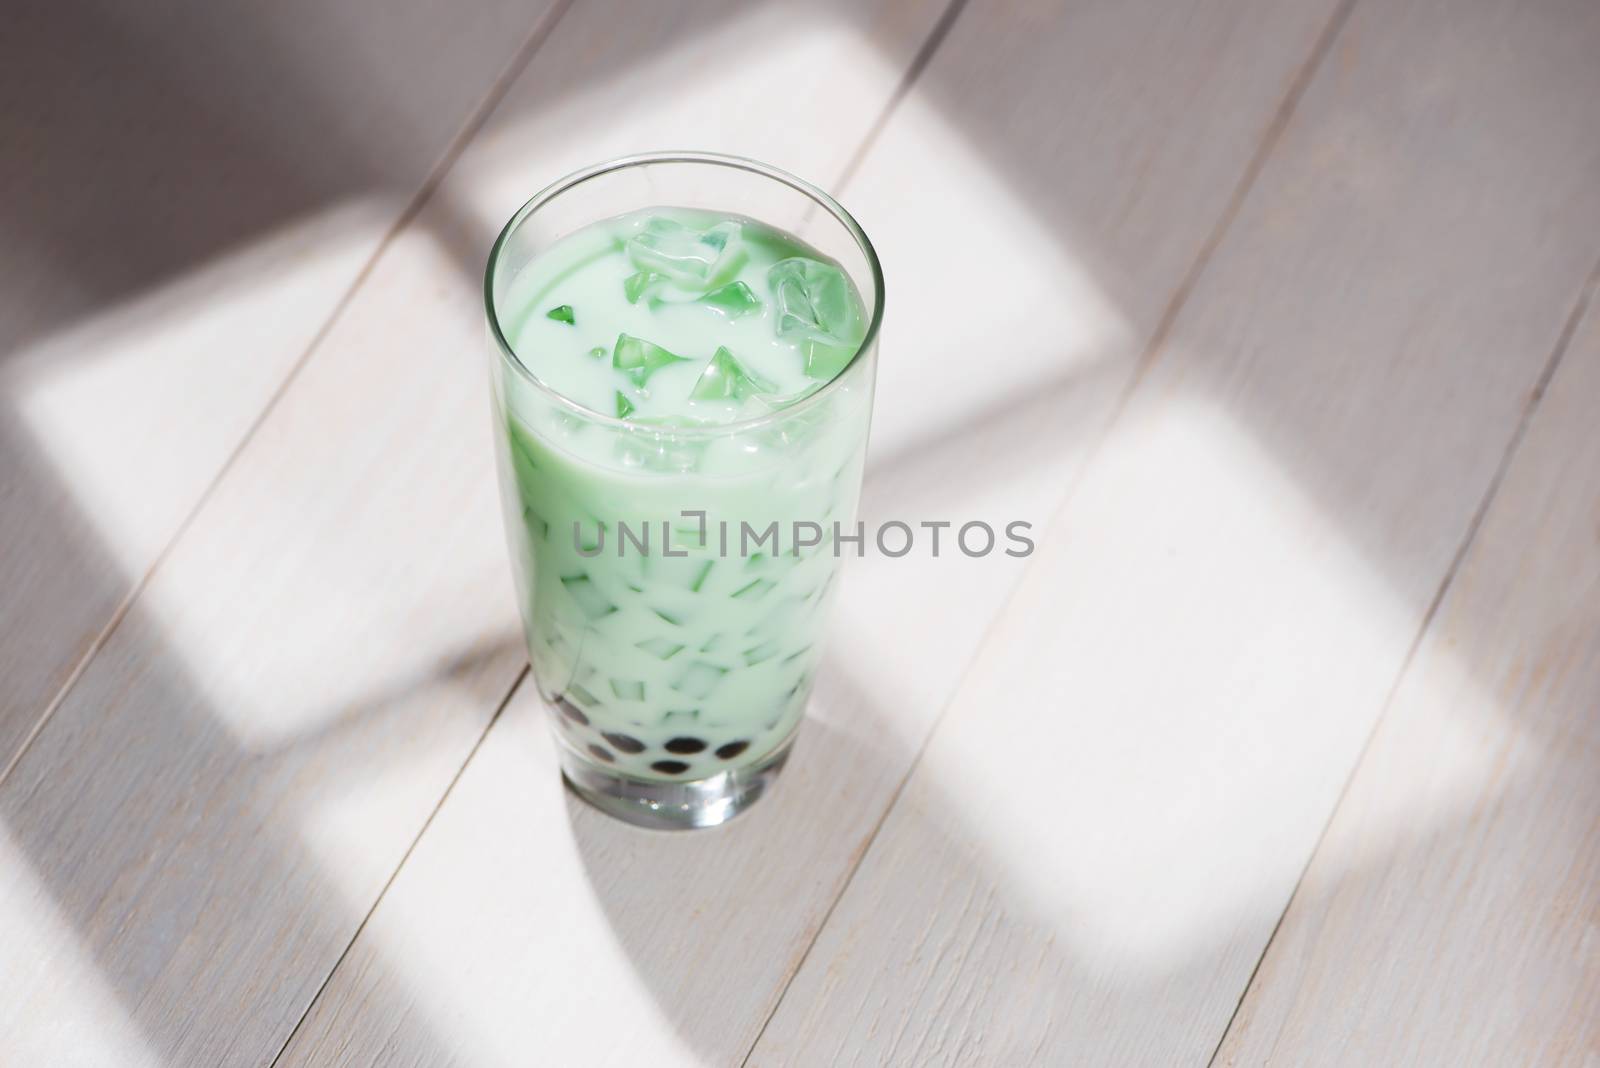 Boba / Bubble tea. Homemade Milk Tea with Pearls on wooden table.